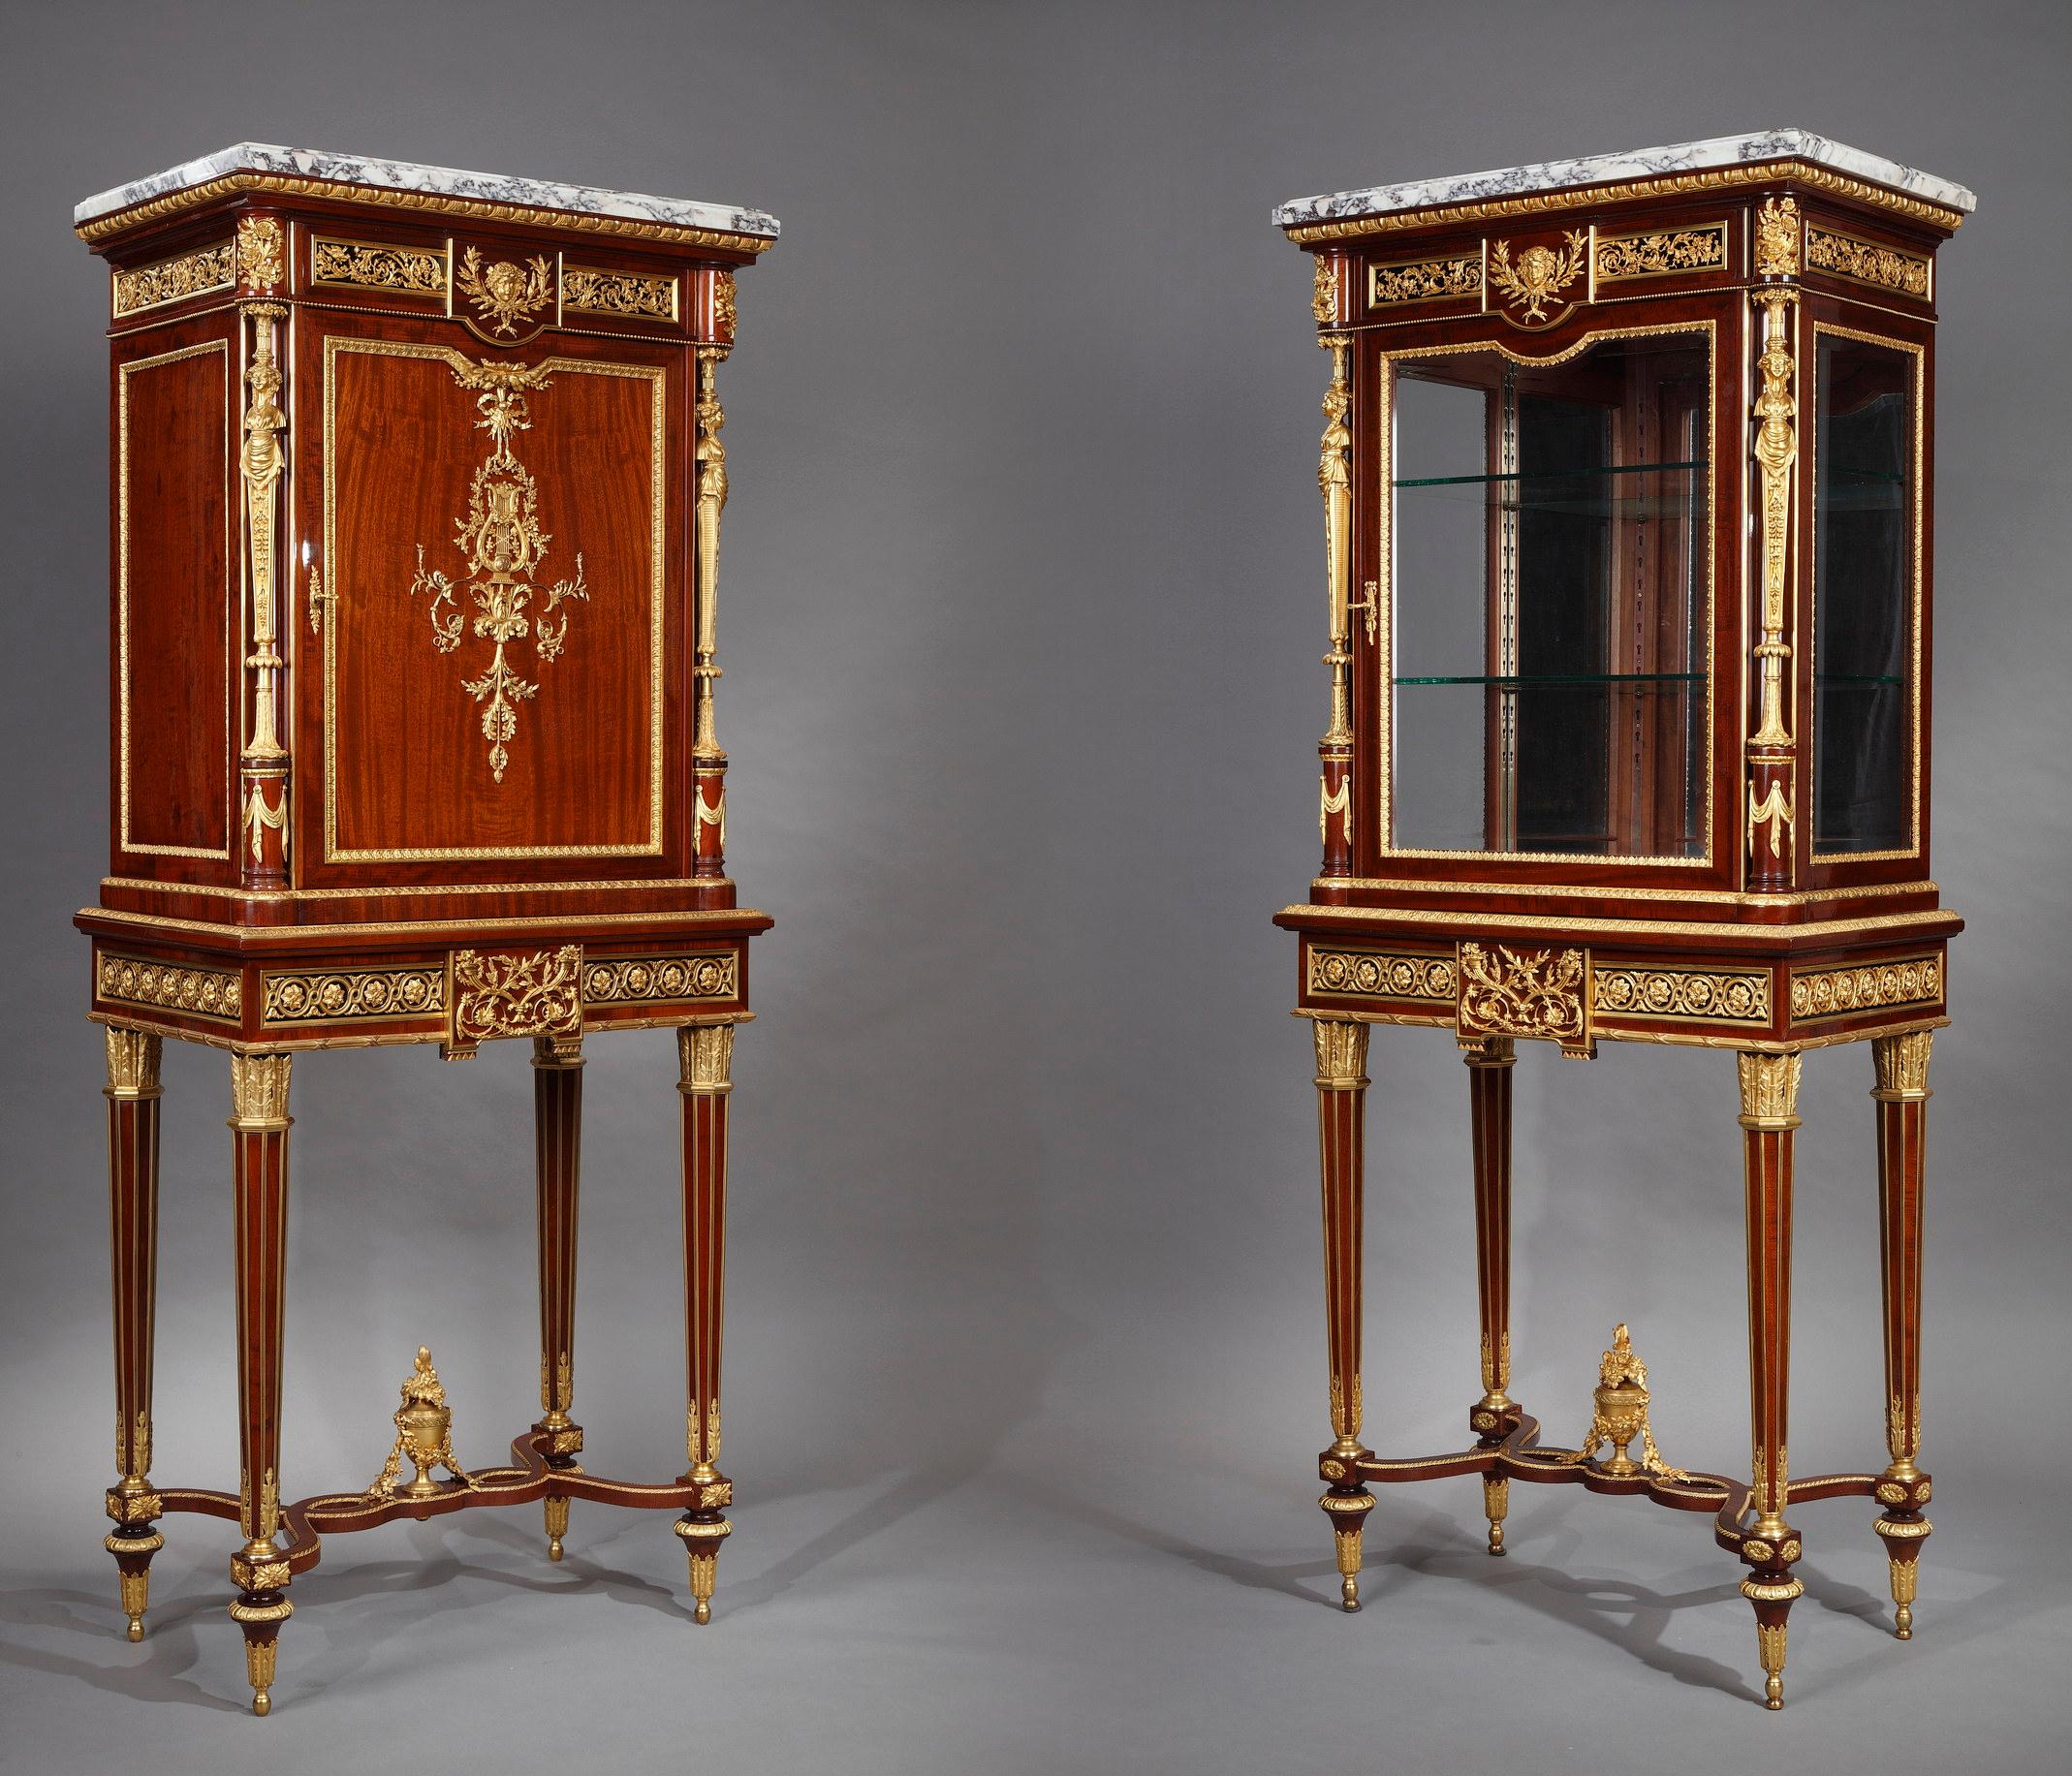 Exceptional Louis XVI style cabinet and its companion vitrine beautifully mounted with chiseled and gilded bronze. They are surmounted by a rectangular top with an egg-and-dart molded edge, above a frieze centered by a laurel-festooned Bacchic mask